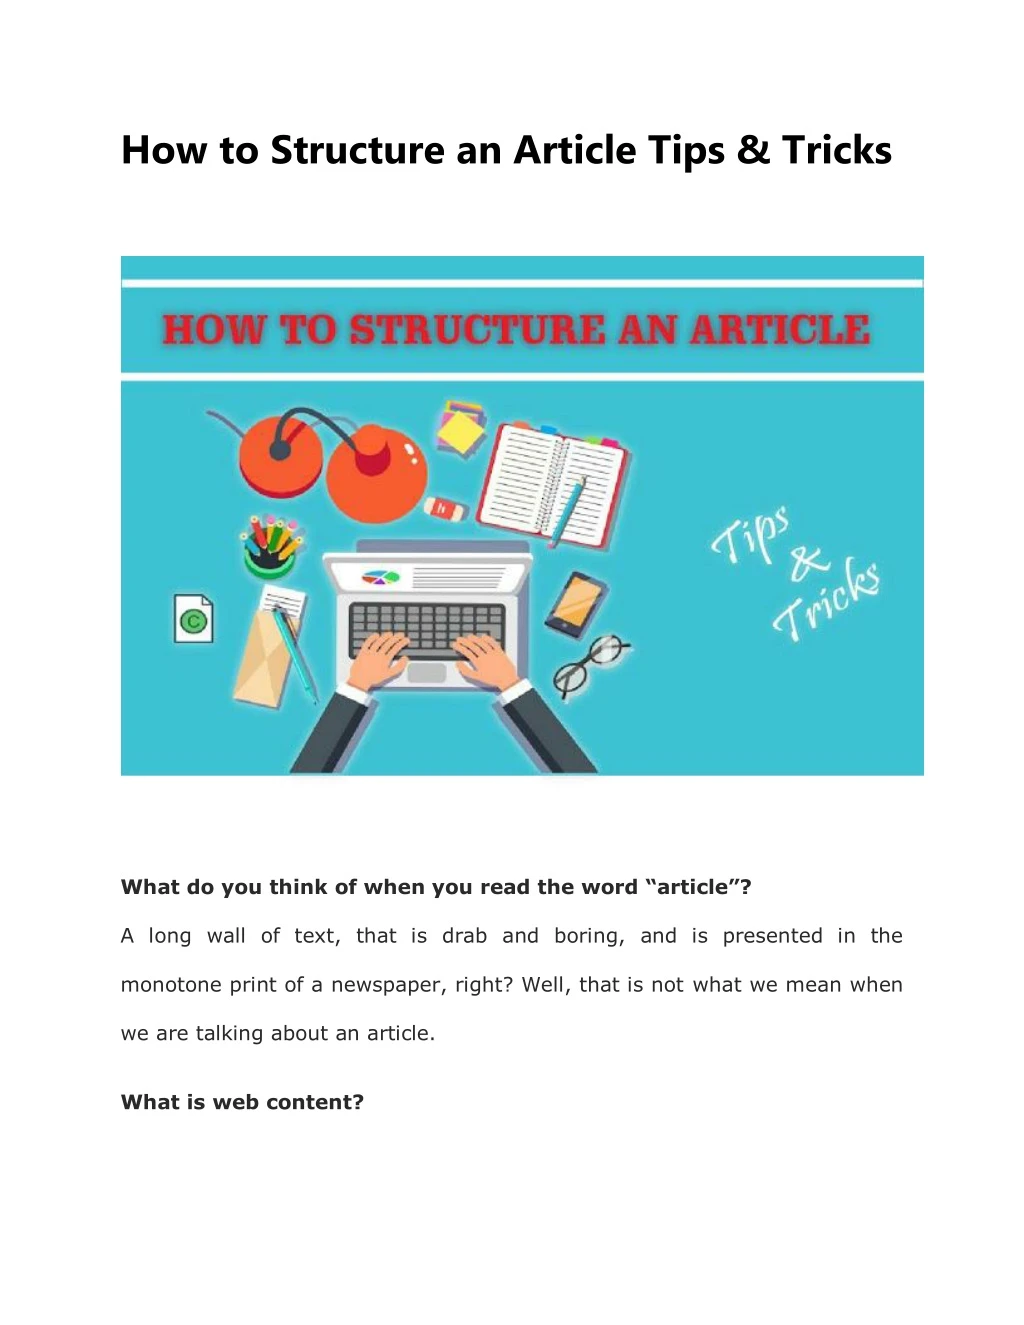 how to structure an article tips tricks